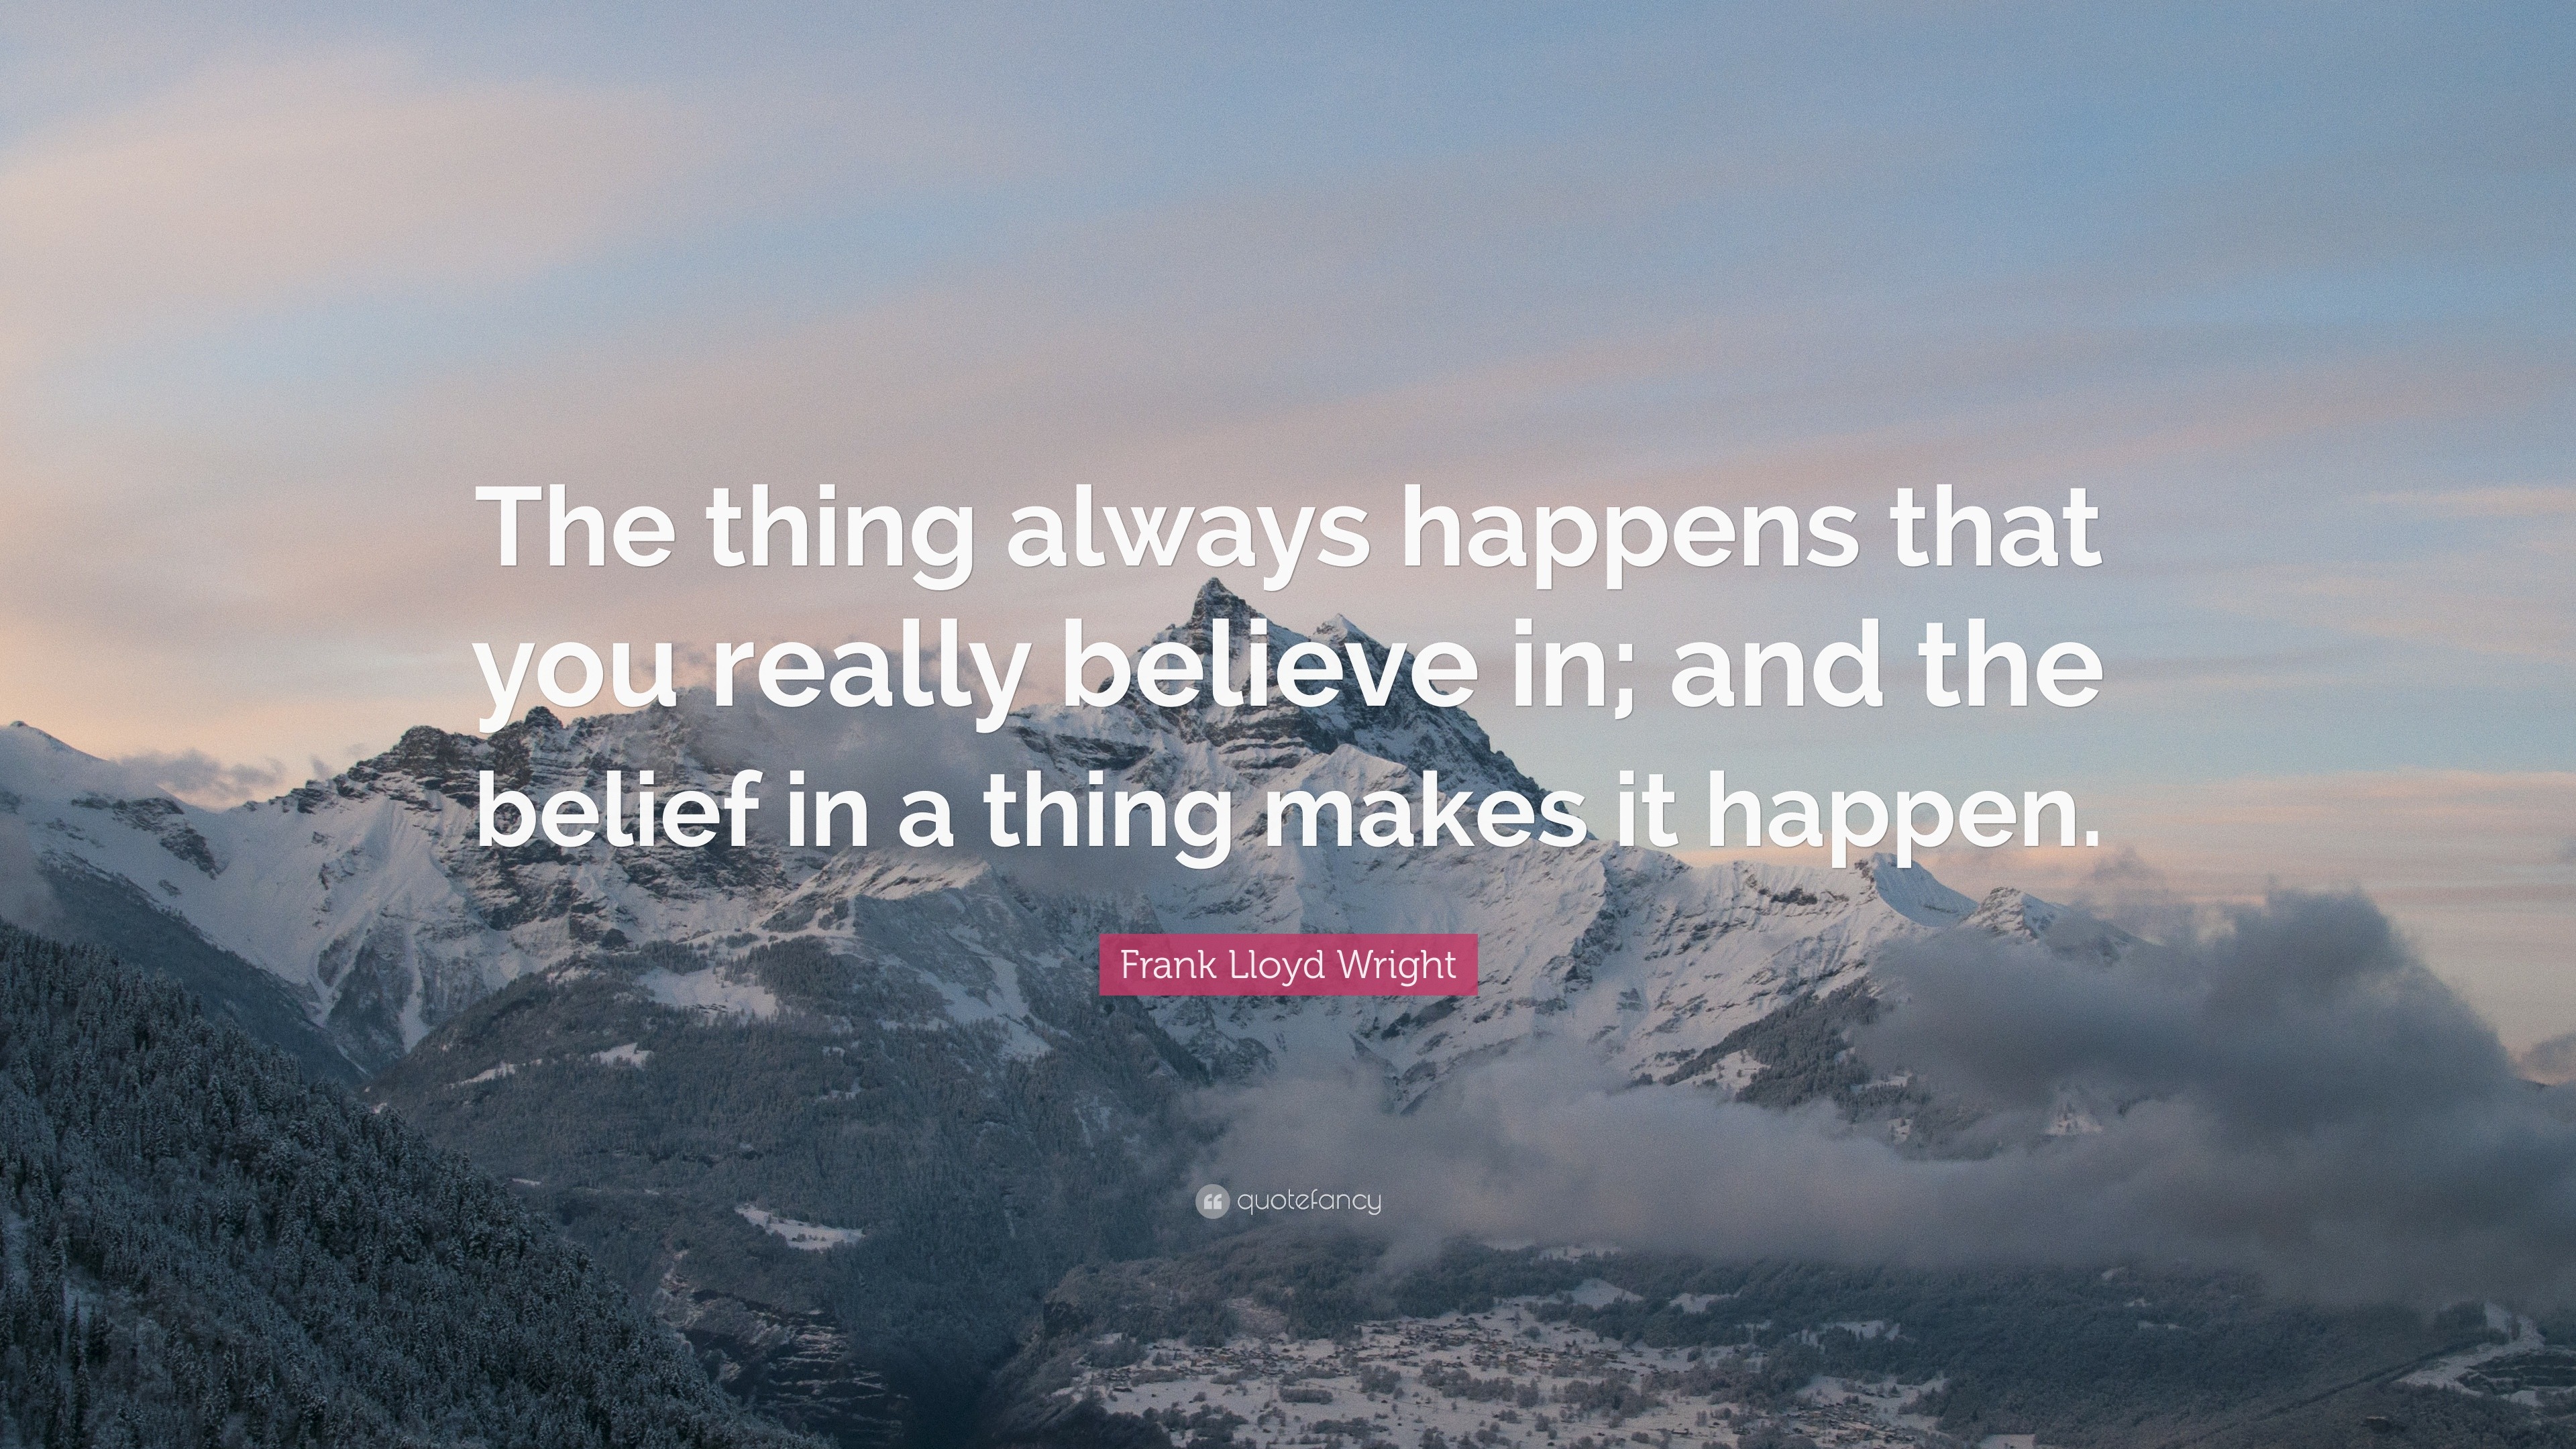 Frank Lloyd Wright Quote: “The thing always happens that you really ...